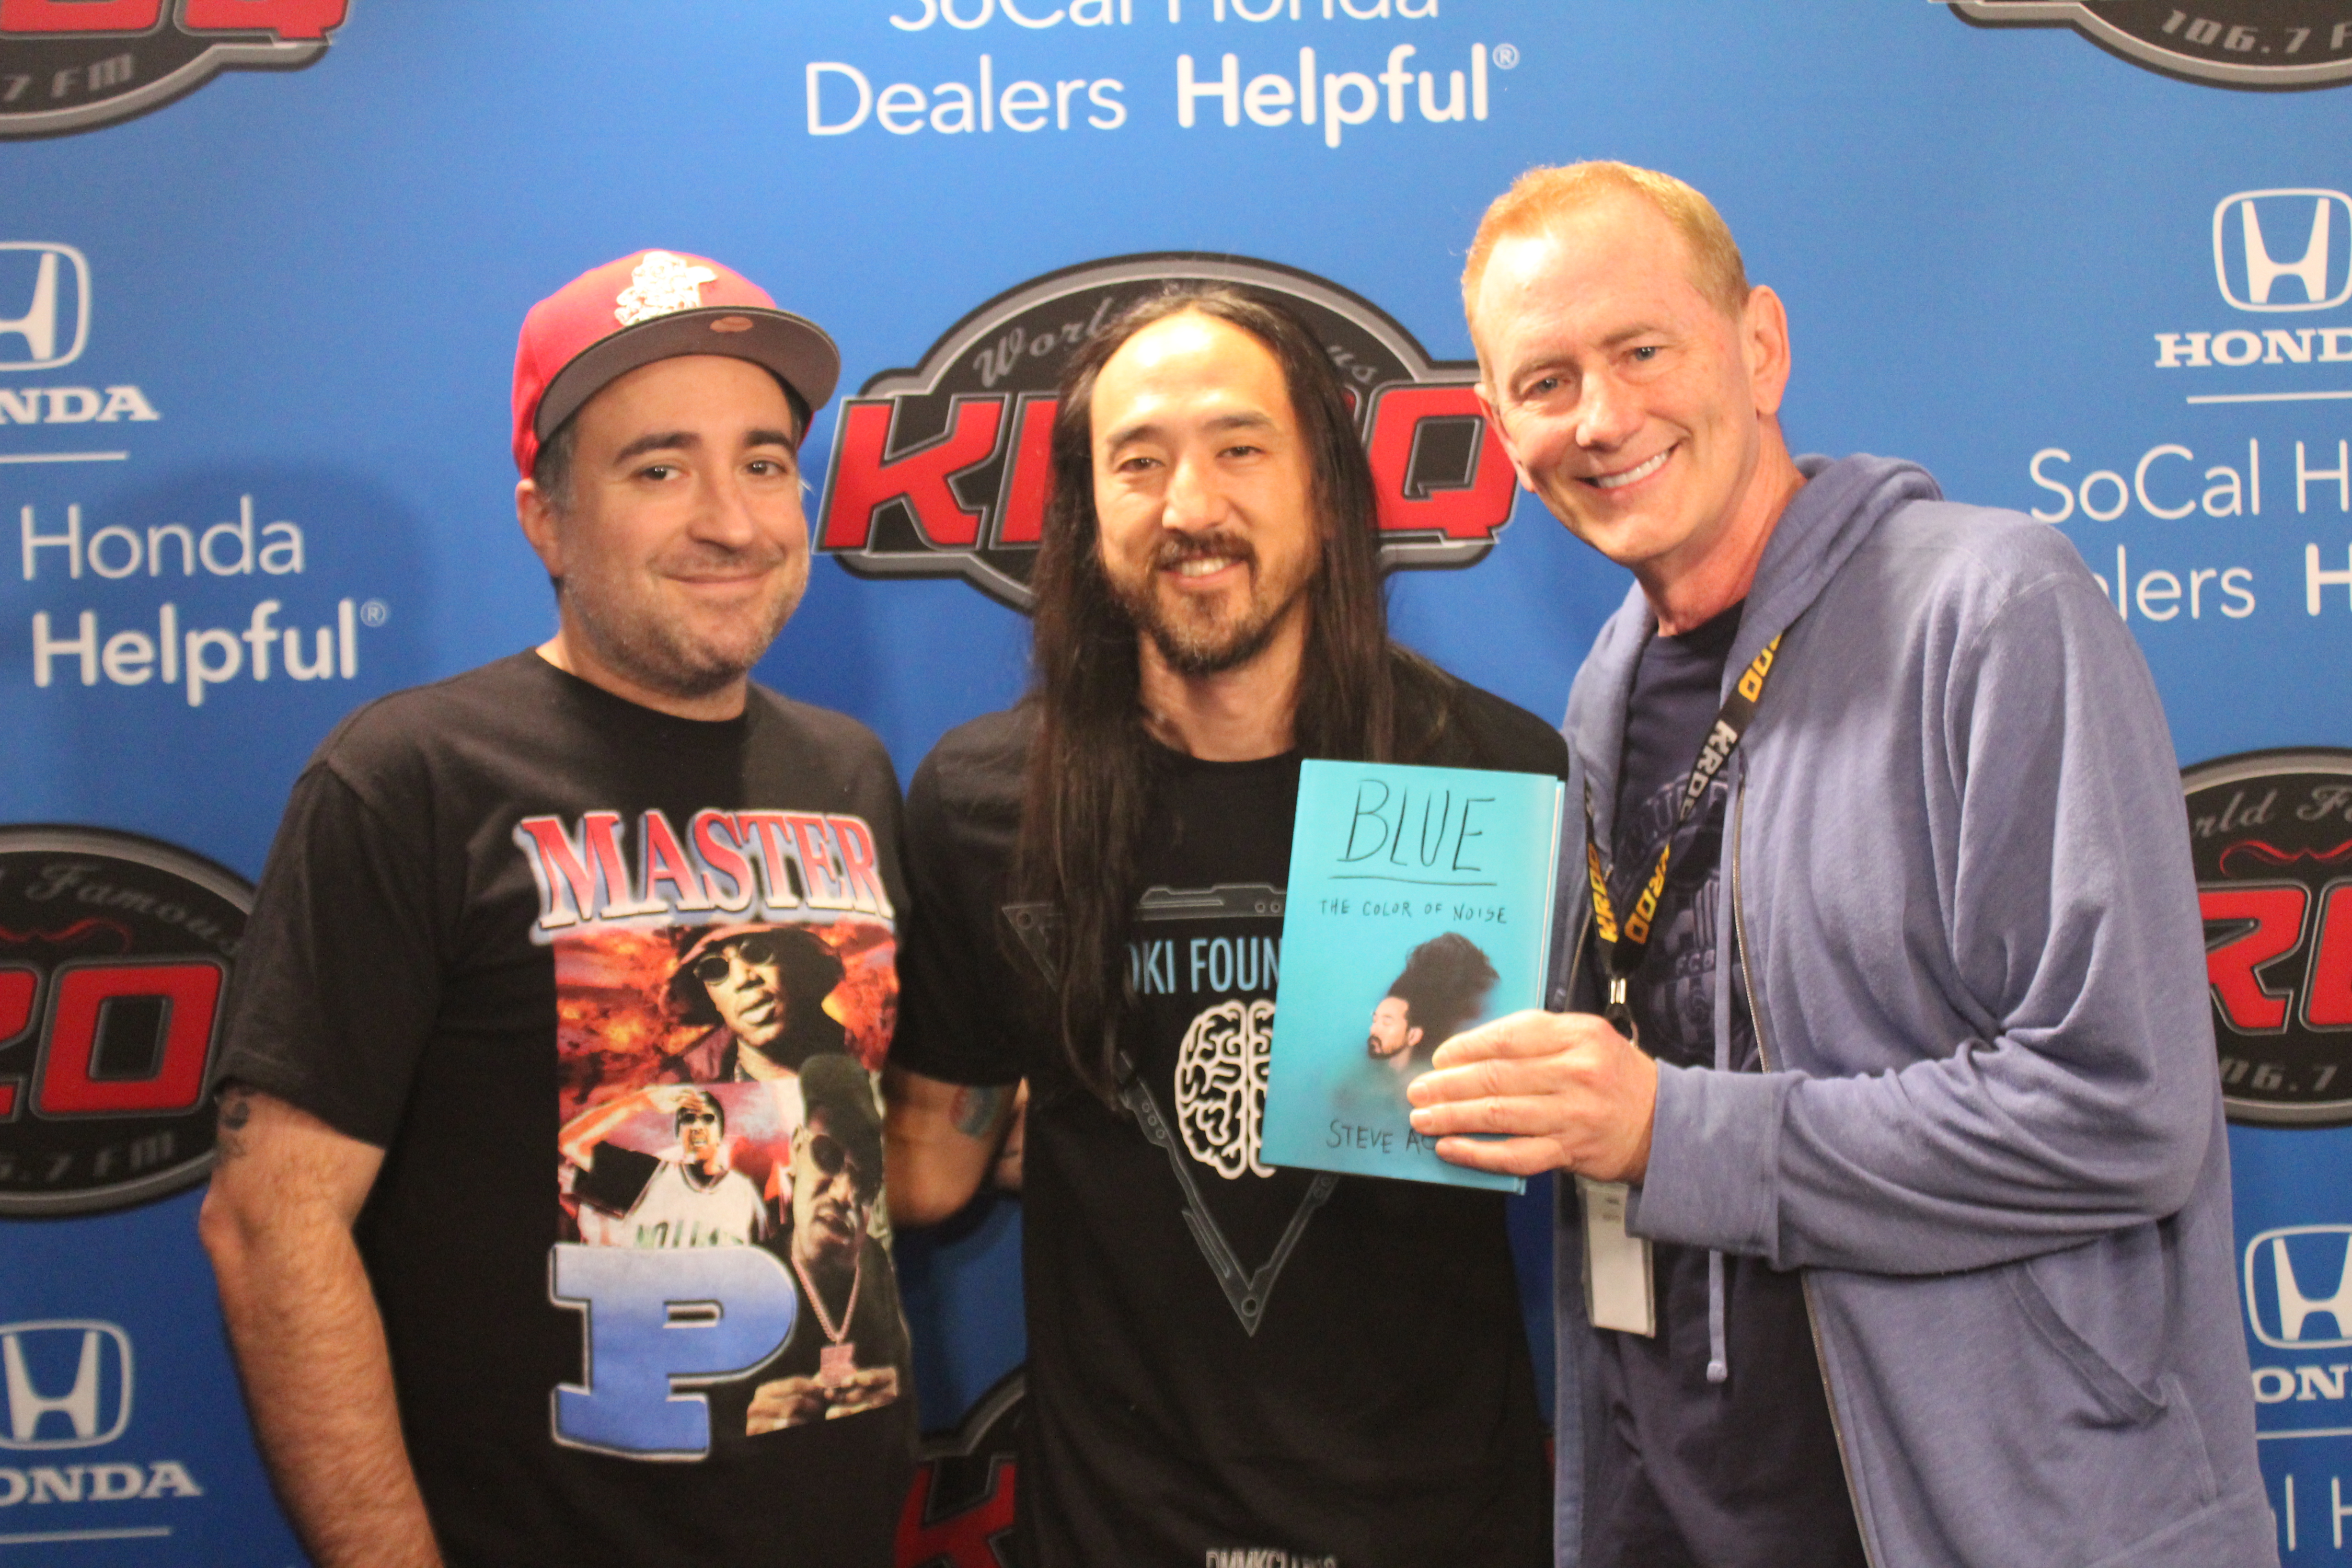 Thursday, September 5th with guests: RJ Bell, Steve Aoki and Dr. Drew